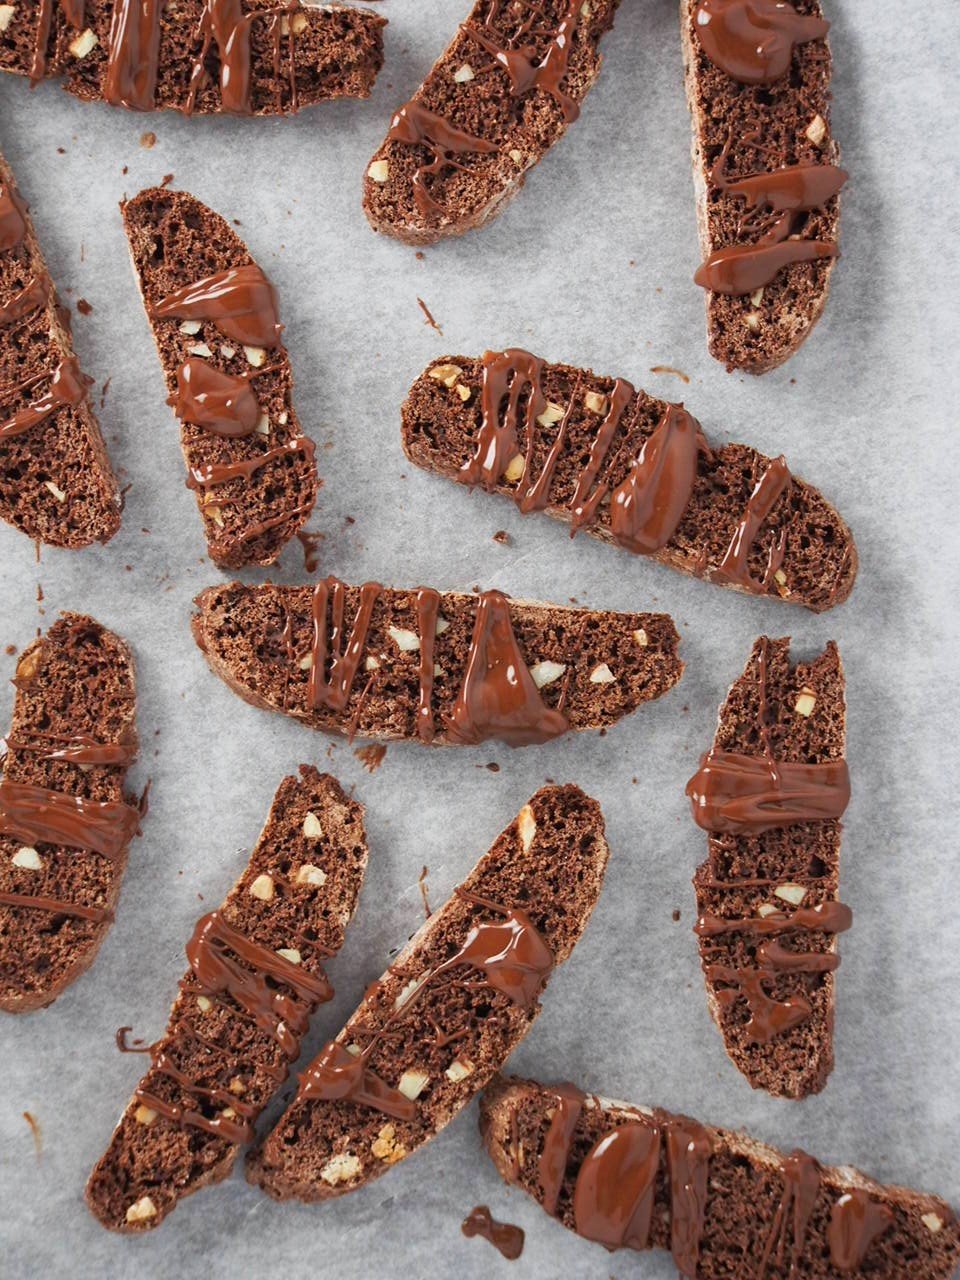 Top angle shot of chocolate almond biscotti on a parchment paper.